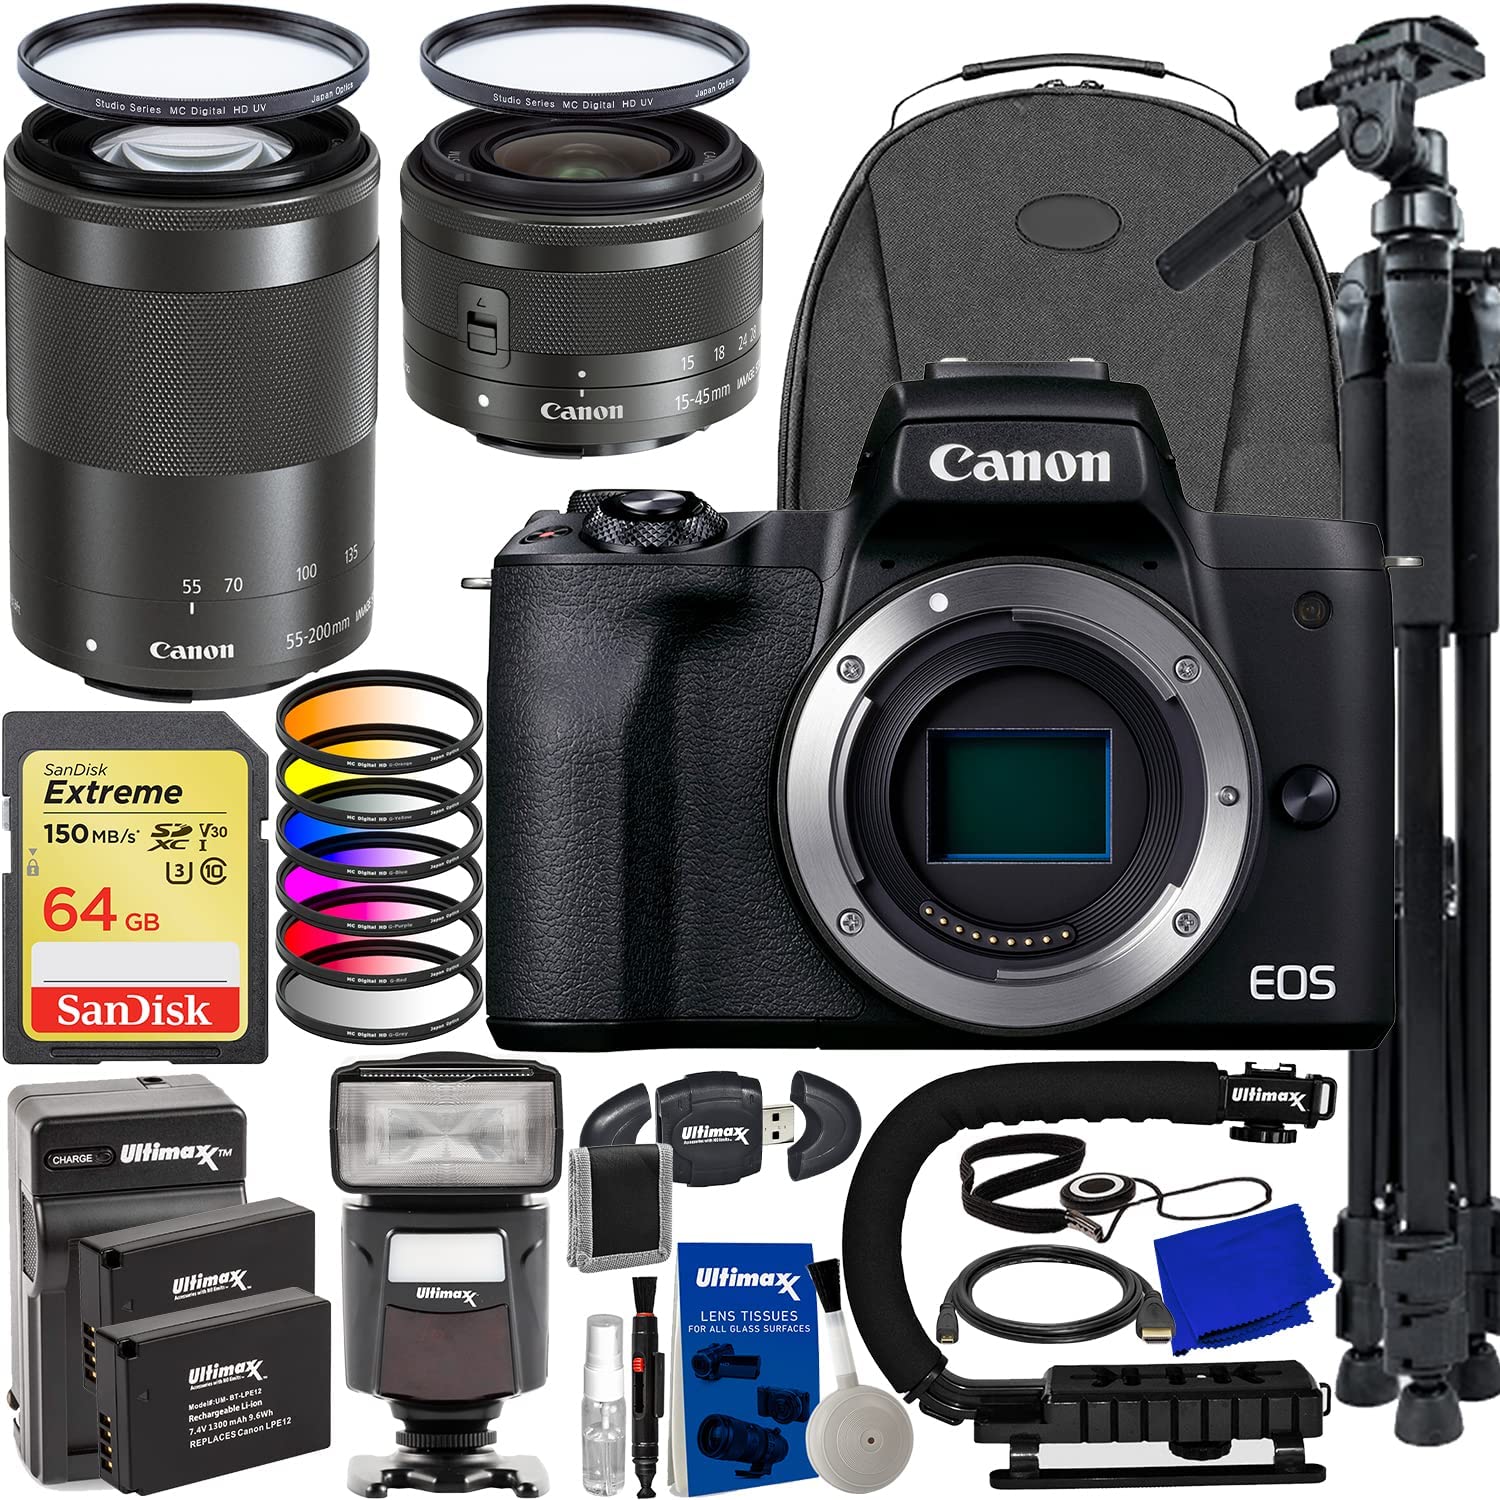 Canon EOS M50 Mark II Mirrorless Camera with 15-45mm and 55-200mm Lenses + SanDisk 64GB Extreme SDXC, 2X Replacement Batteries, Speedlite w/LED Video Light, 72” Tripod & Much More (41pc Bundle)